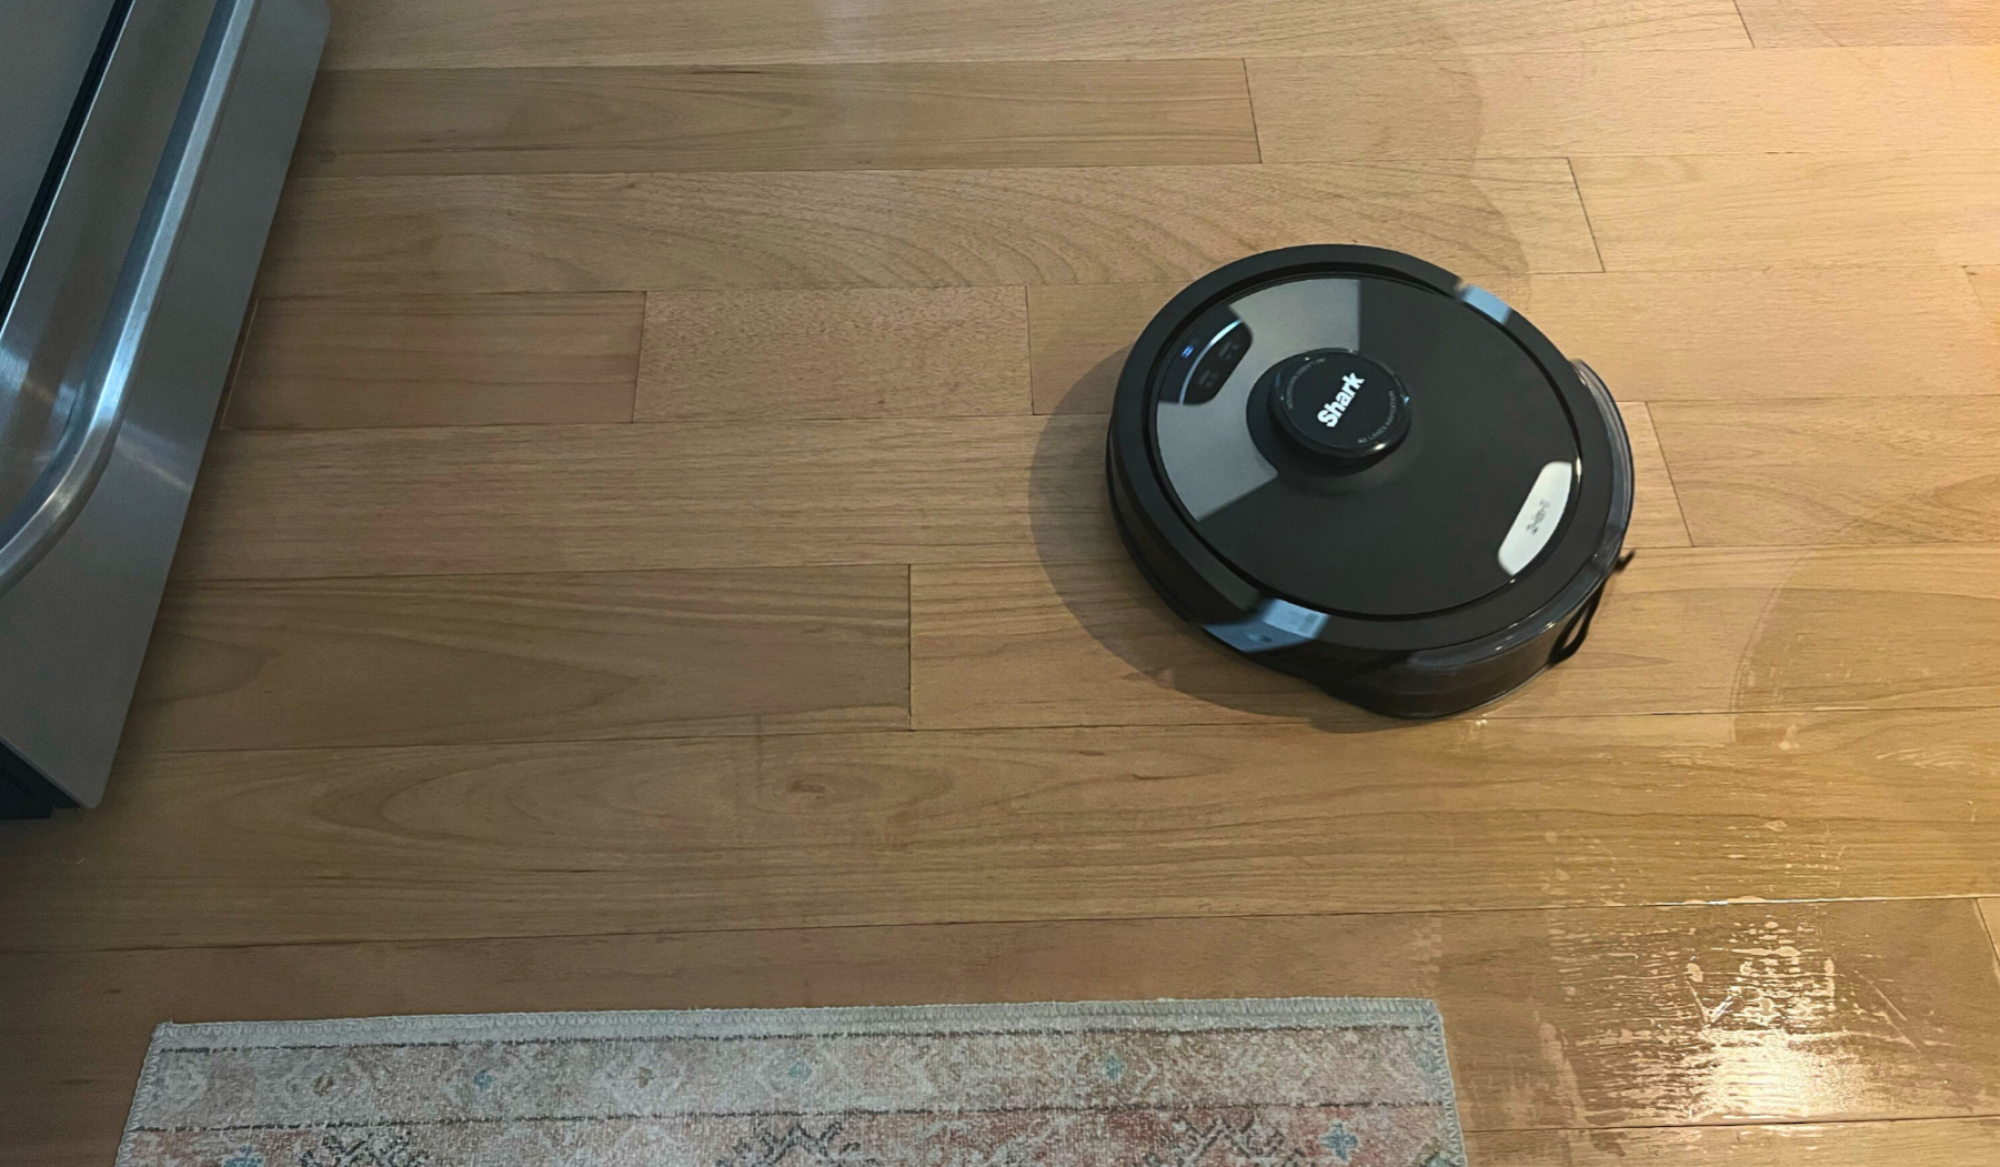 Shark Matrix Plus robot vacuum mopping hardwood floor with stove and rug in peripherals